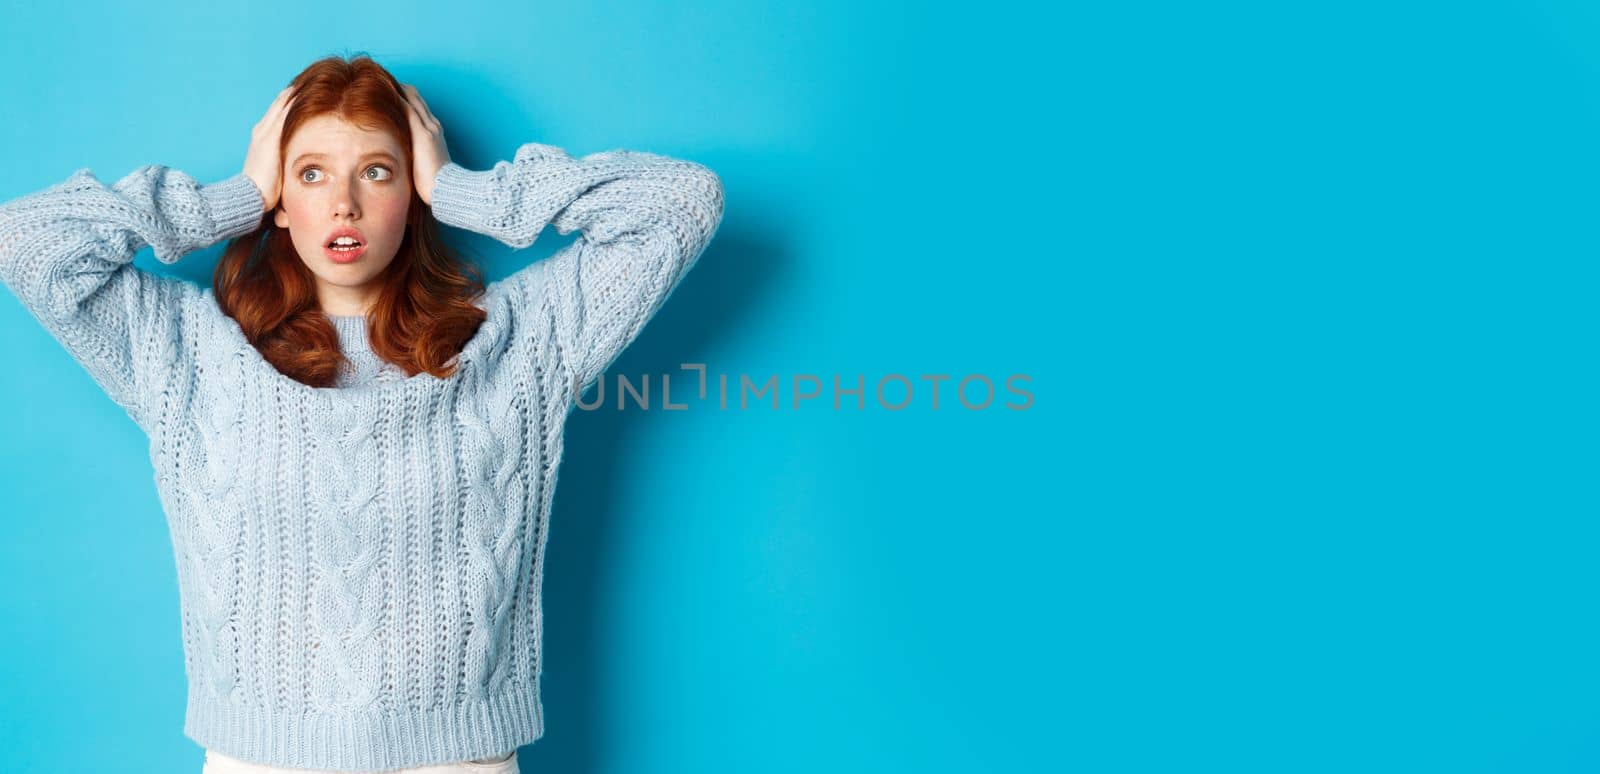 Worried redhead girl standing overwhelmed, holding hands on head in panic and staring left at logo, standing anxious against blue background.